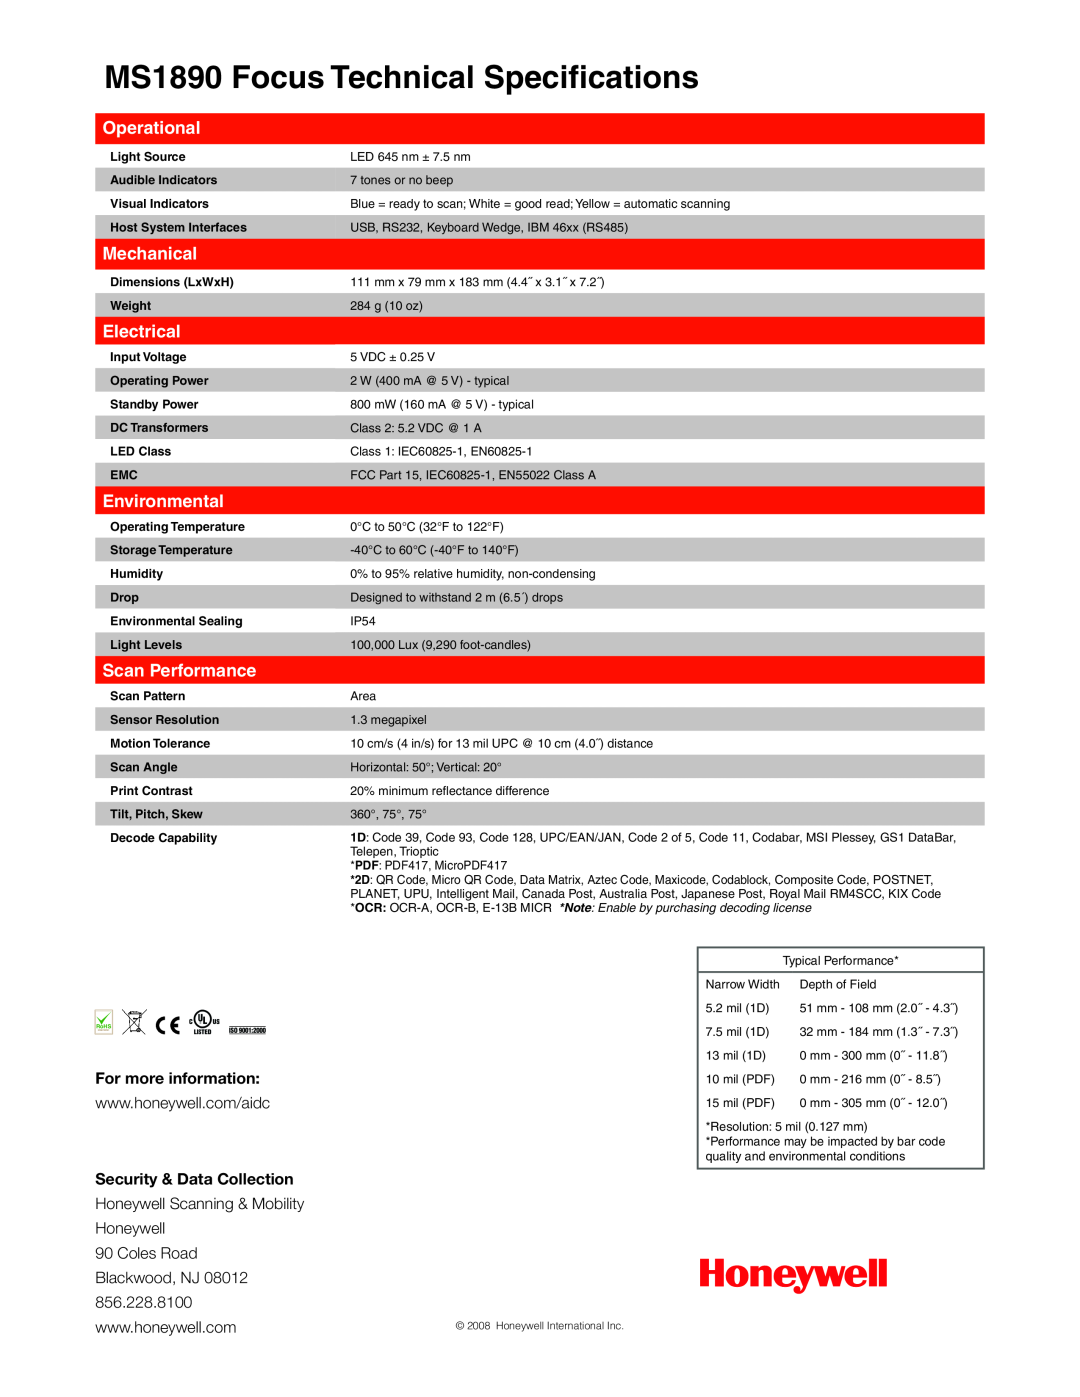 Metrologic Instruments manual MS1890 Focus Technical Specifications, Operational, Mechanical, Electrical, Environmental 